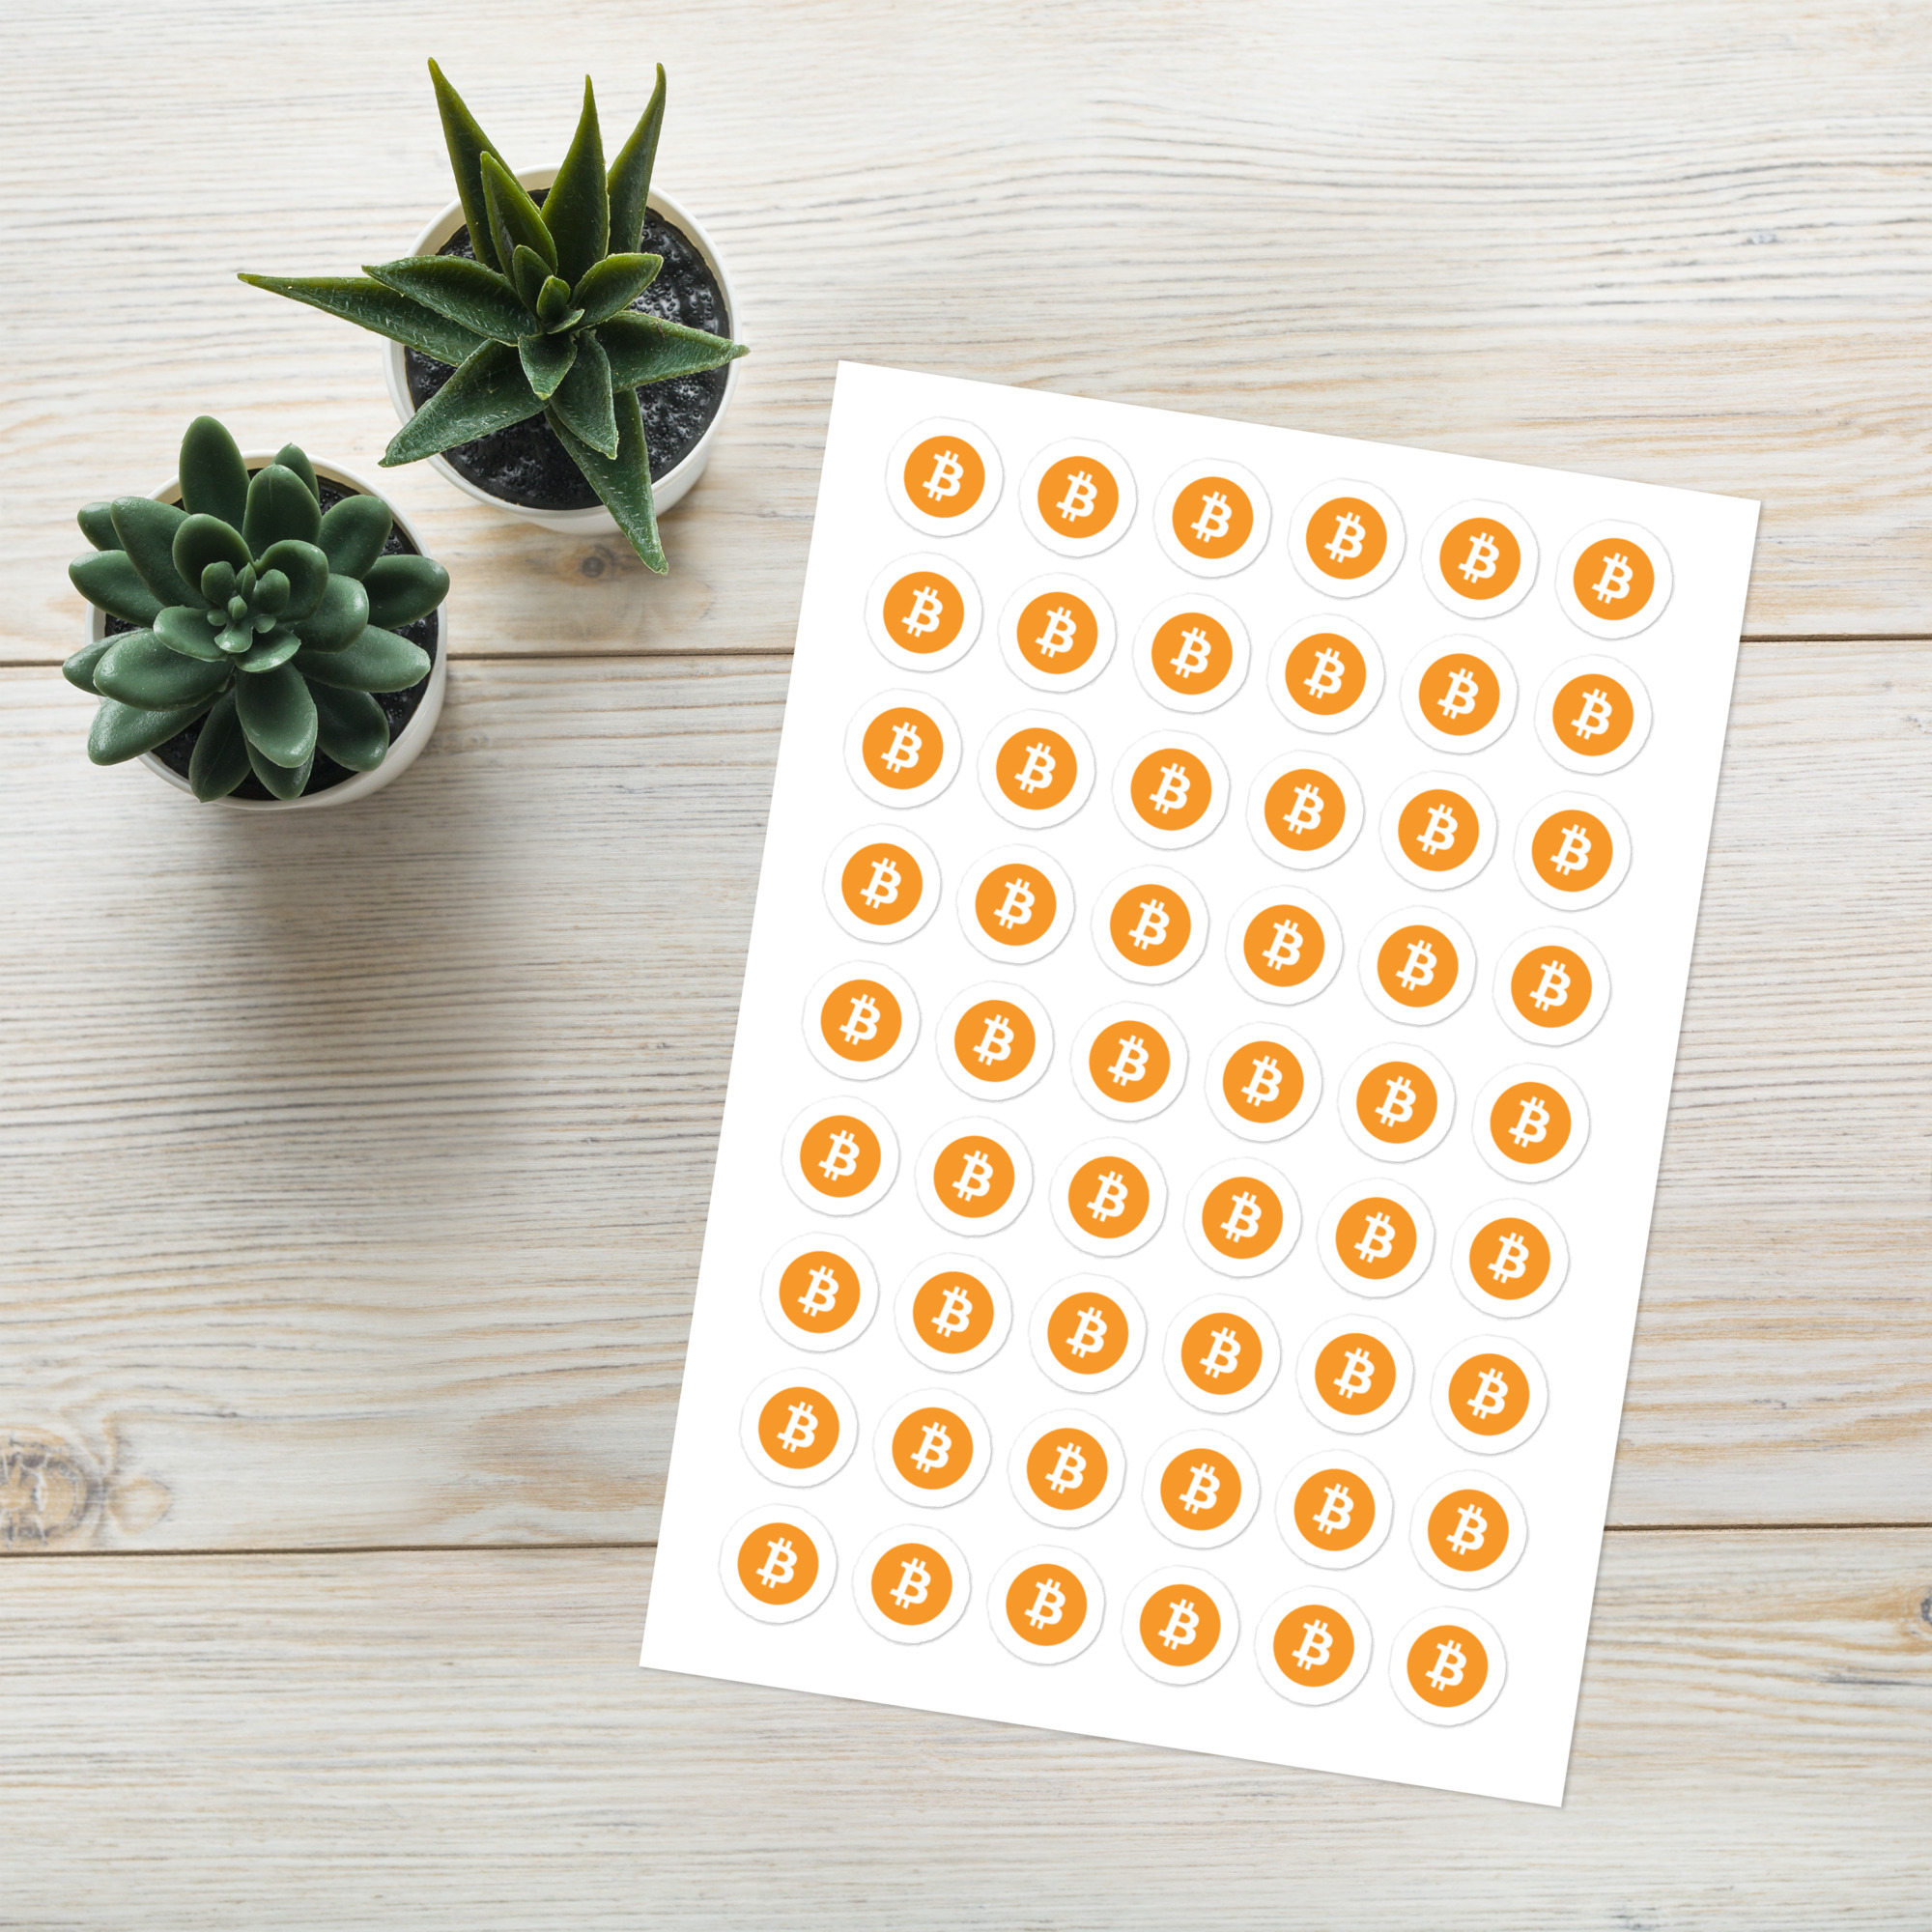 Bitcoin Stickers Sheet on a desk with a cactus. Featuring 54 stickers for only $6.